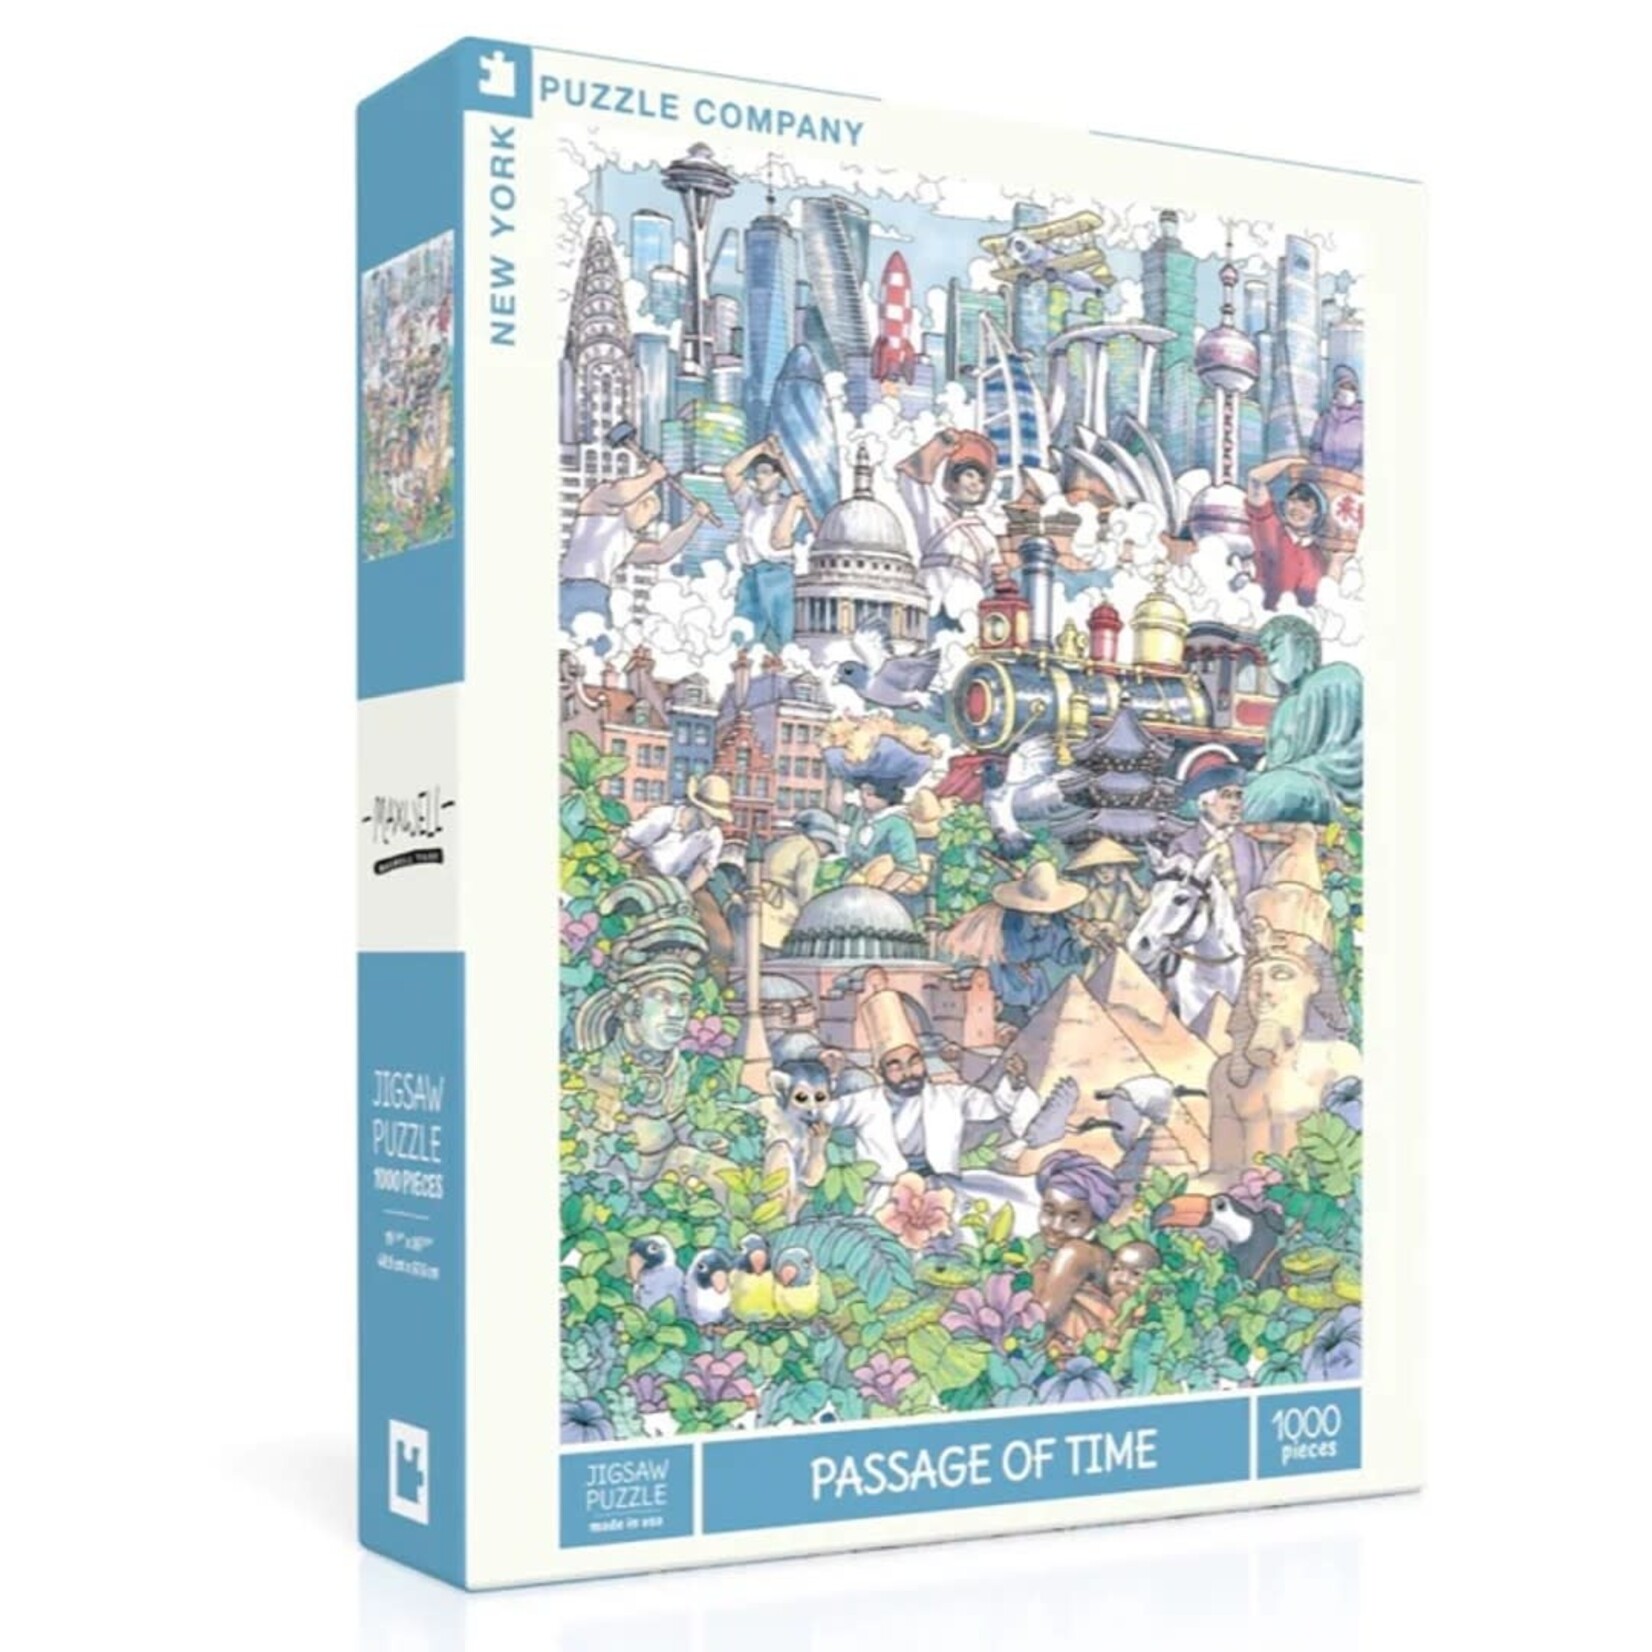 New York Puzzle Company 1000 pc Puzzle Passage of Time